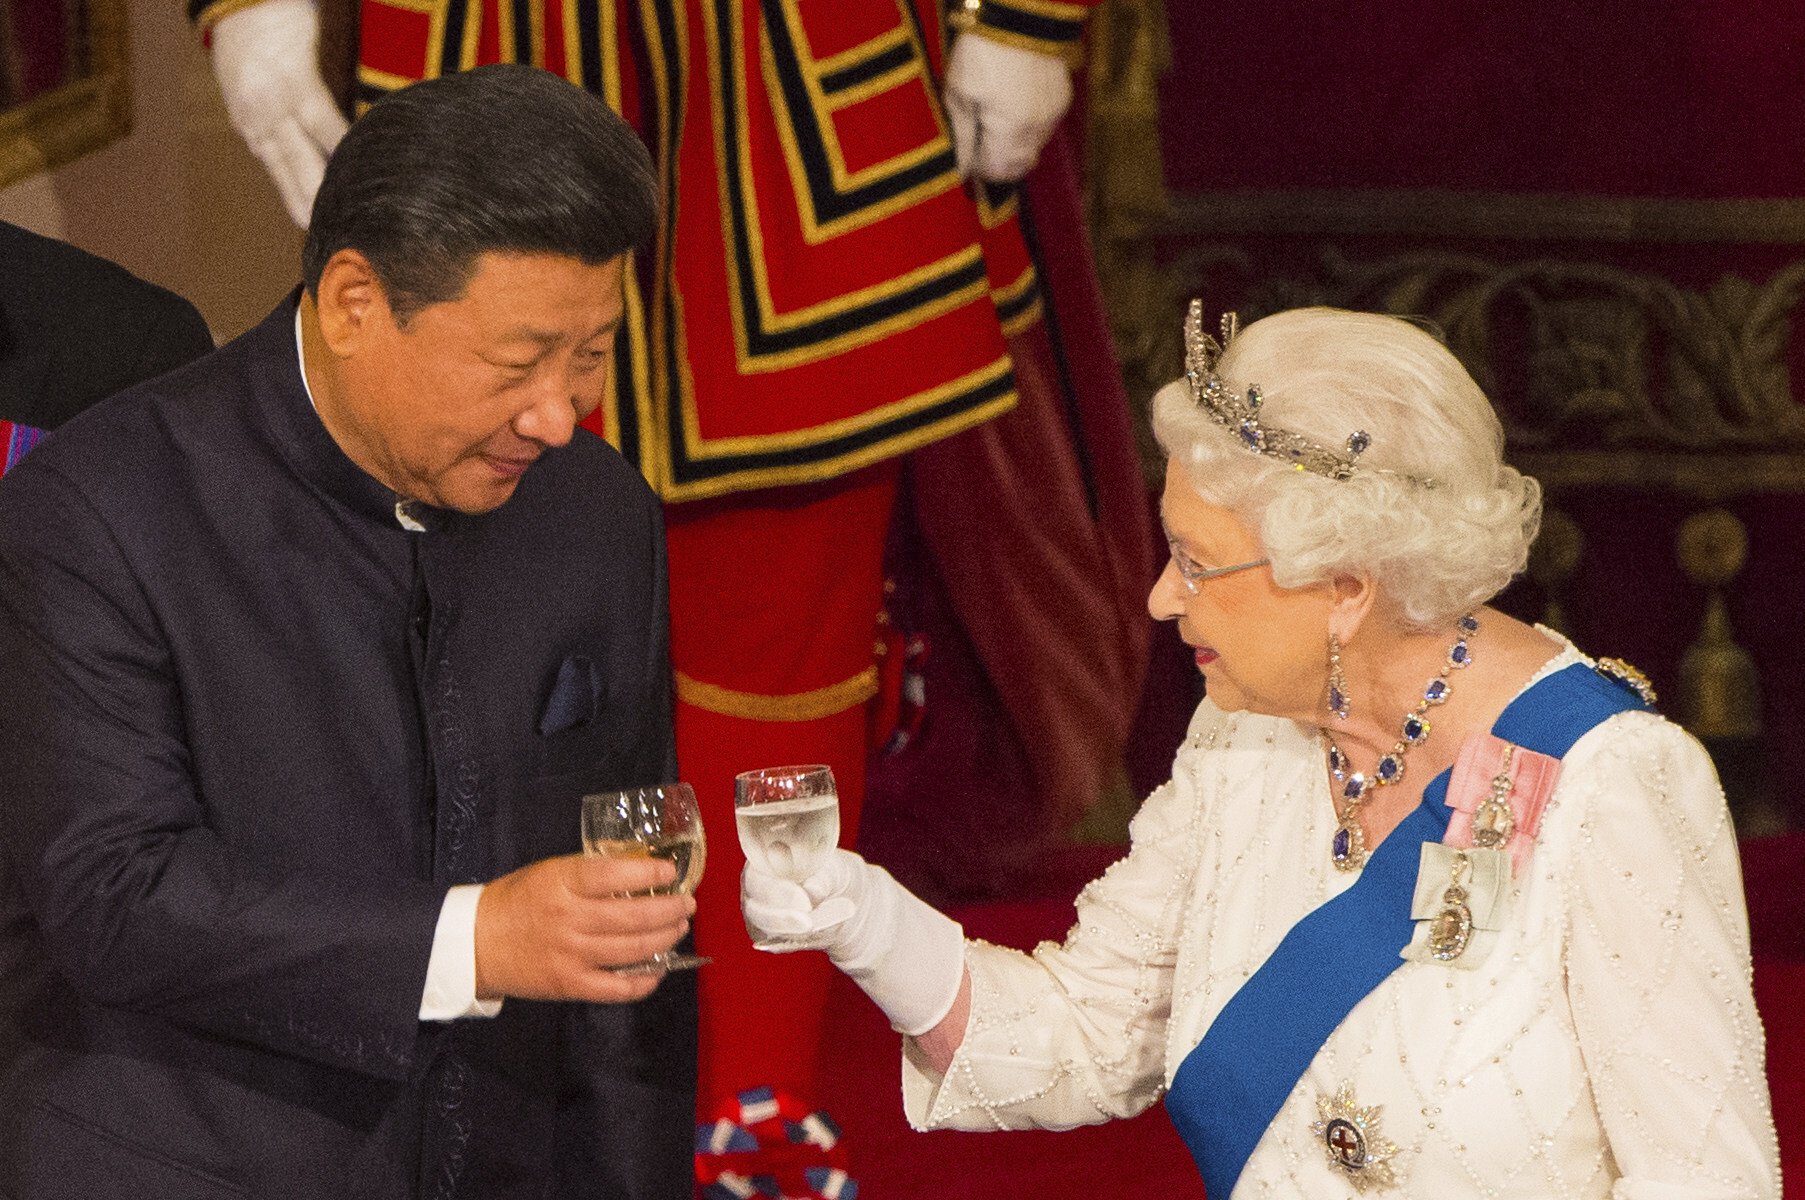 President Xi Jinping shares a toast with Britain’s Queen Elizabeth during a state banquet at Buckingham Palace in London on October 20, 2015. Photo: AP